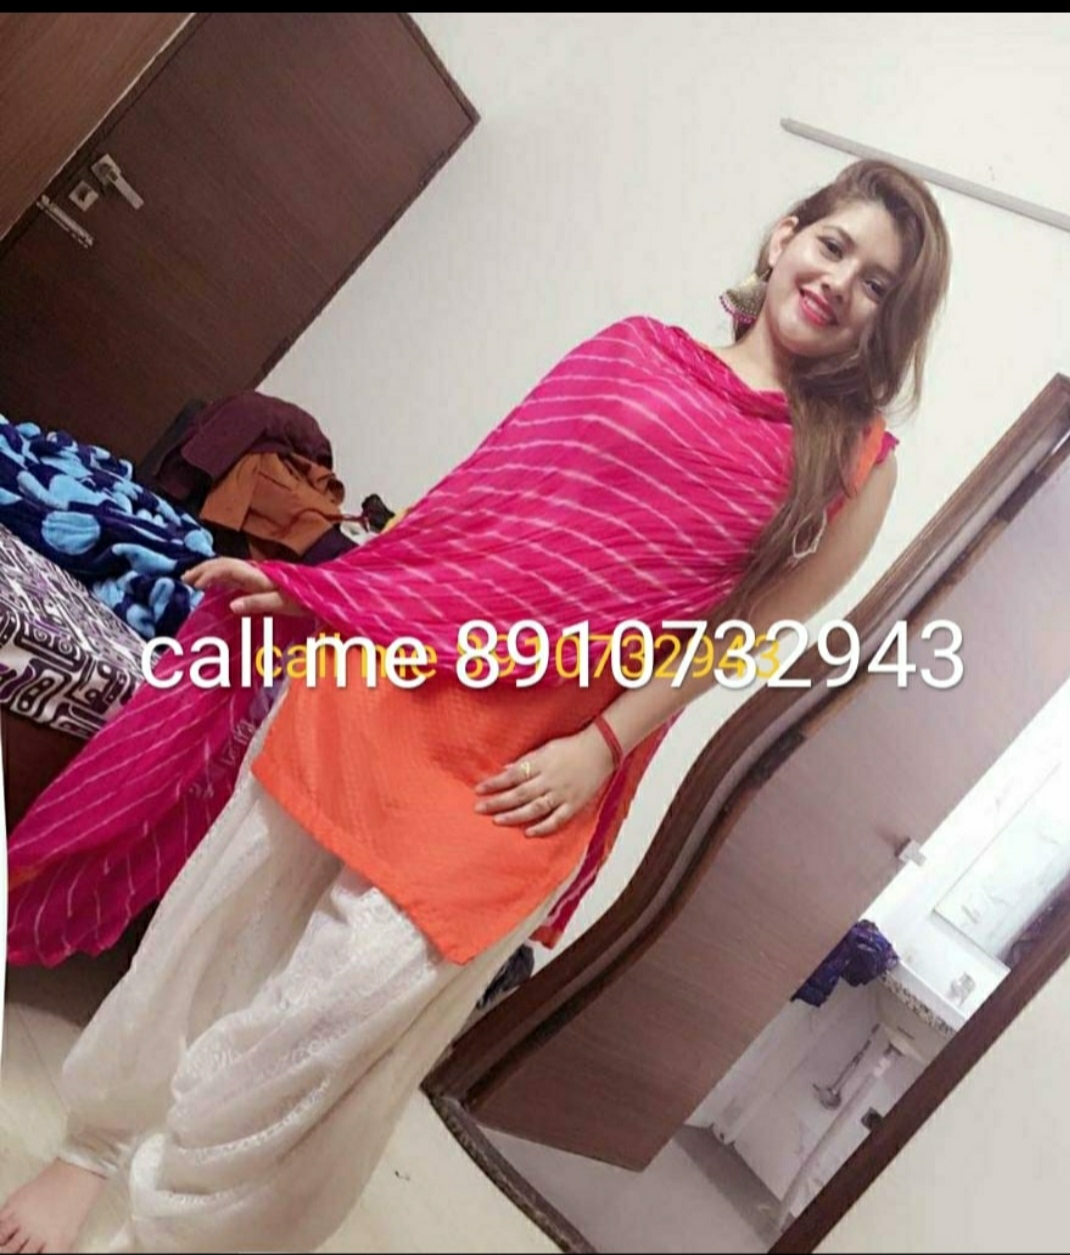 Low price escorts service available anytime jshsb